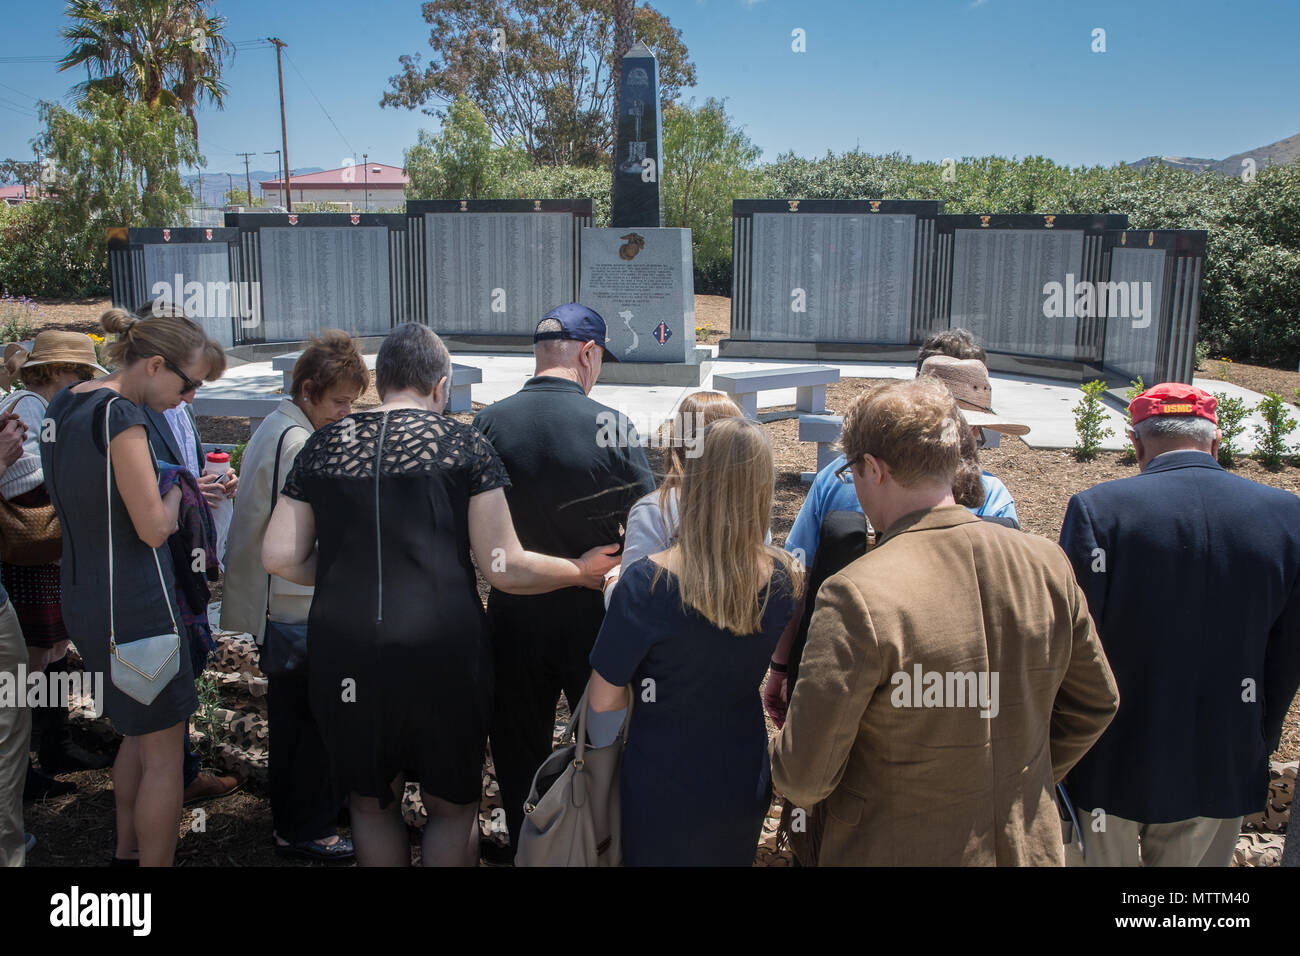 U.S. Marine Corps and Navy veterans observe the 5th Marines Vietnam War Memorial during the unveiling ceremony in the Camp San Mateo Memorial Garden at Marine Corps Base Camp Pendleton, Calif., May 28, 2018. The memorial is inscribed with the names of 2,706 Marines and sailors who gave their lives serving our great nation. (U.S. photo by Lance Cpl. Rhita Daniel) Stock Photo